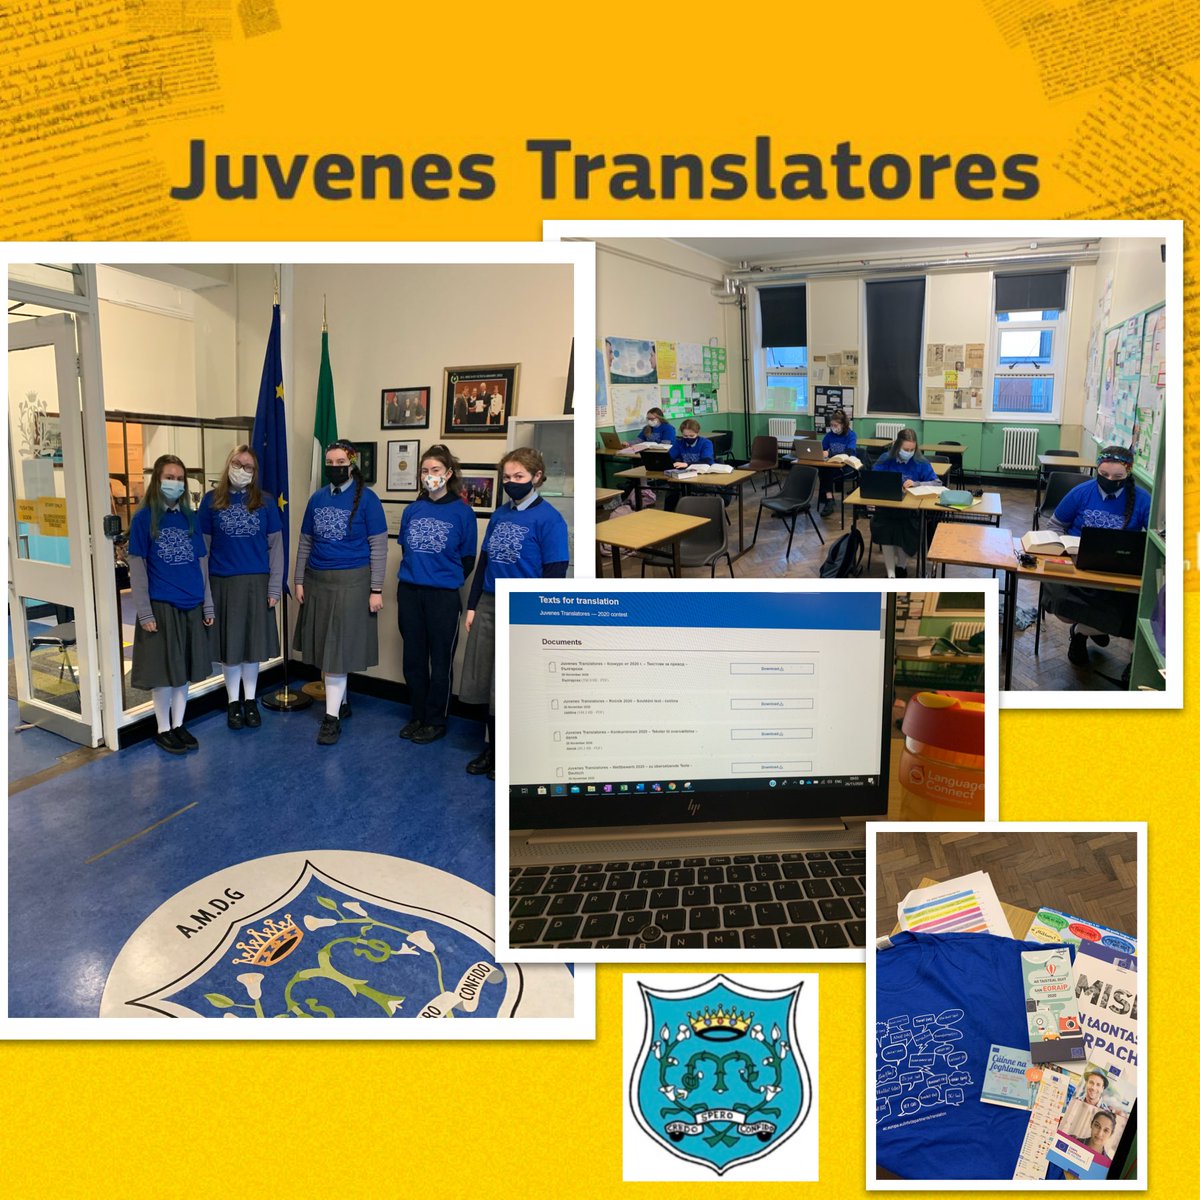 Well done to our 5 participants in this year’s #JuvenesTranslatores this morn, who translated from French & Spanish into English👏🏻👏🏻 🇫🇷 🇪🇸 Congrats for taking part & best of luck! @translatores @eurireland #languagesconnect #ManorHouseMFL #ManorHouseFrench #ManorHouseSpanish